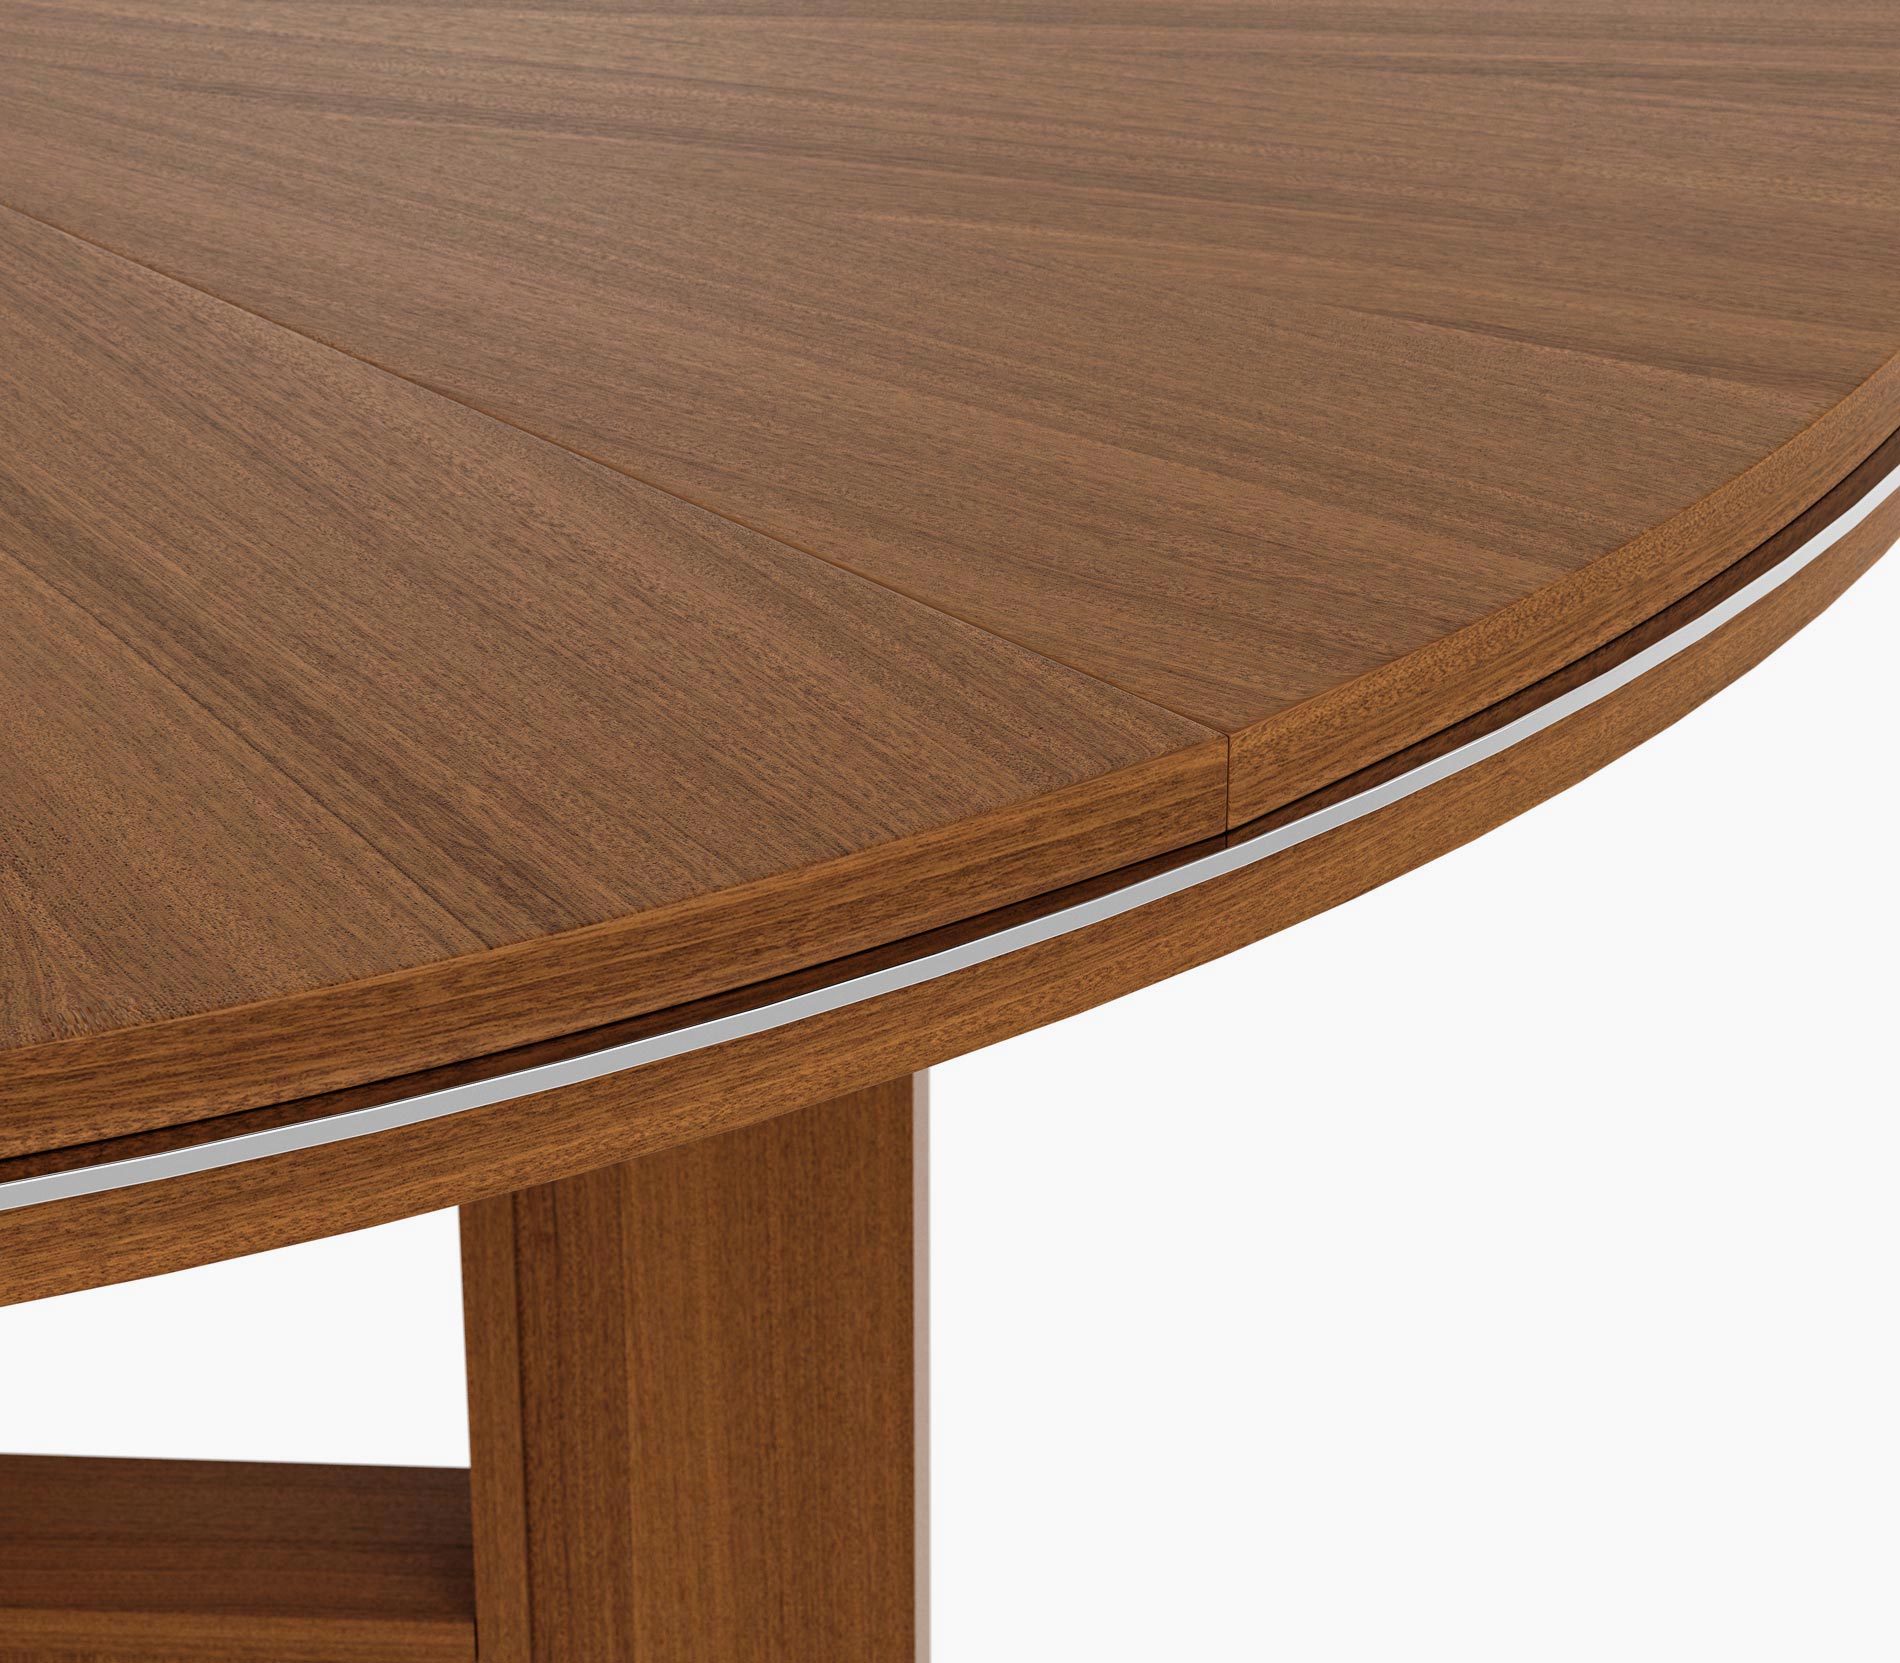 Edge detail on a circular Highline Fifty Meeting Table in natural quarter cut walnut with polished chrome details